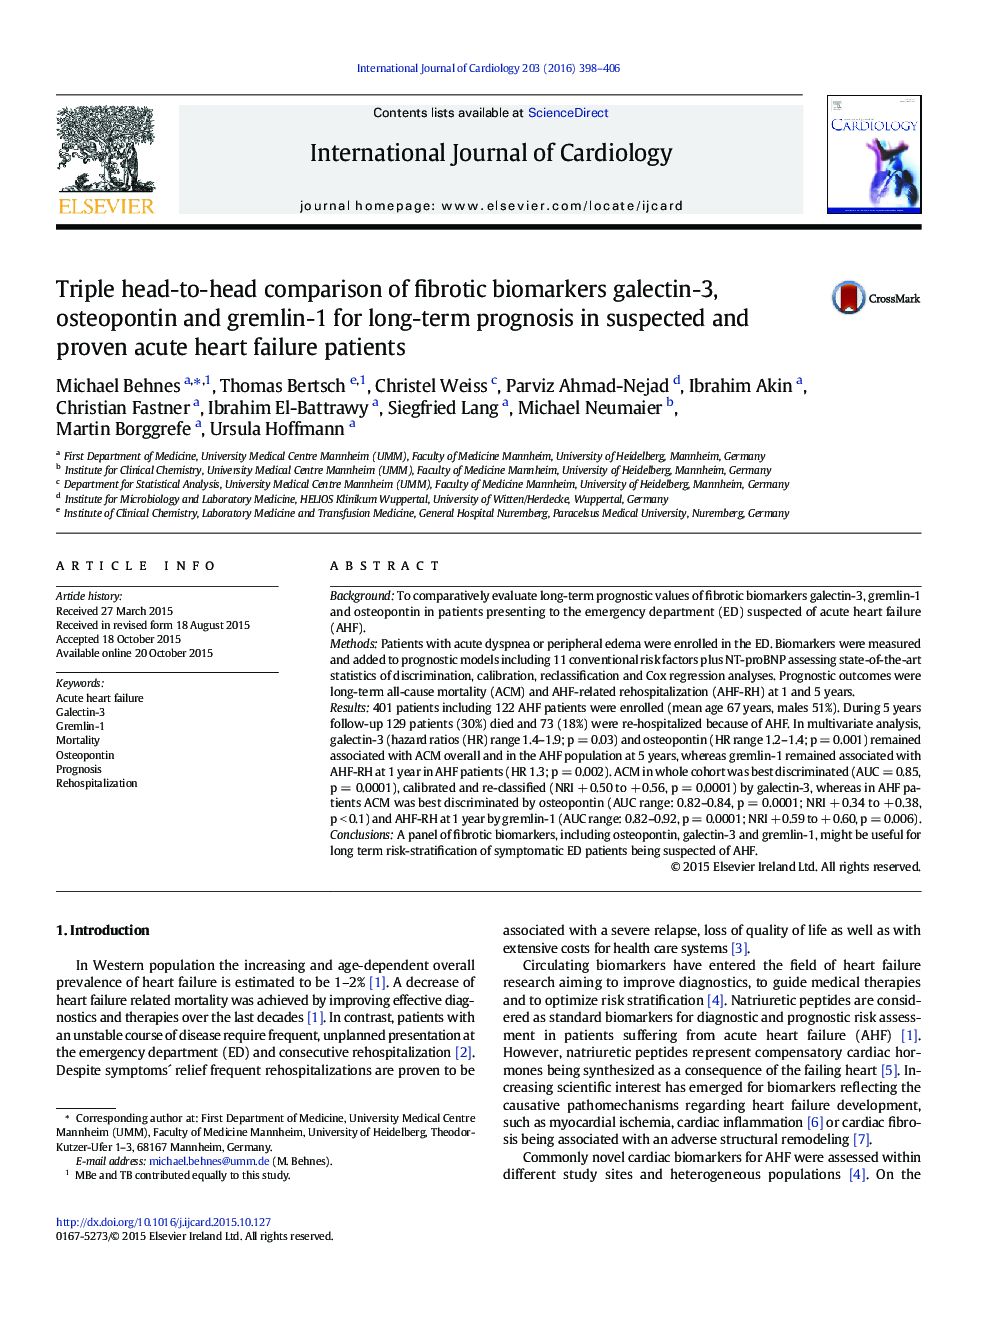 Triple head-to-head comparison of fibrotic biomarkers galectin-3, osteopontin and gremlin-1 for long-term prognosis in suspected and proven acute heart failure patients